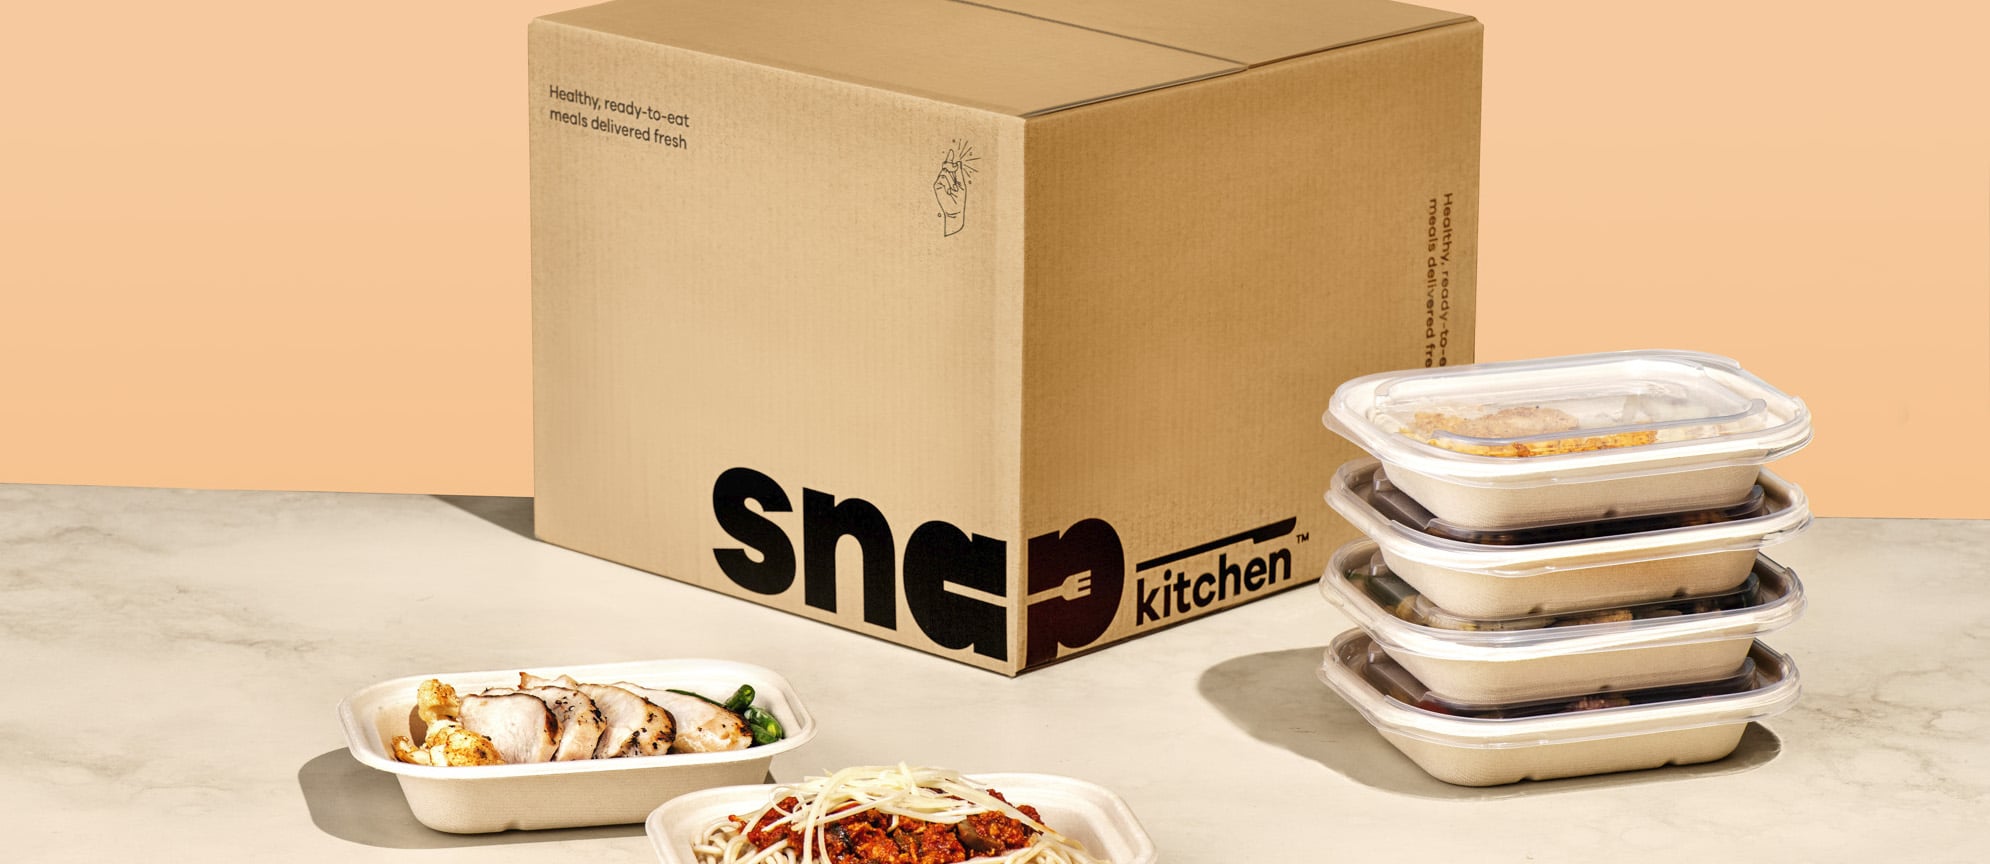 Cardboard box with snapkitchen meals